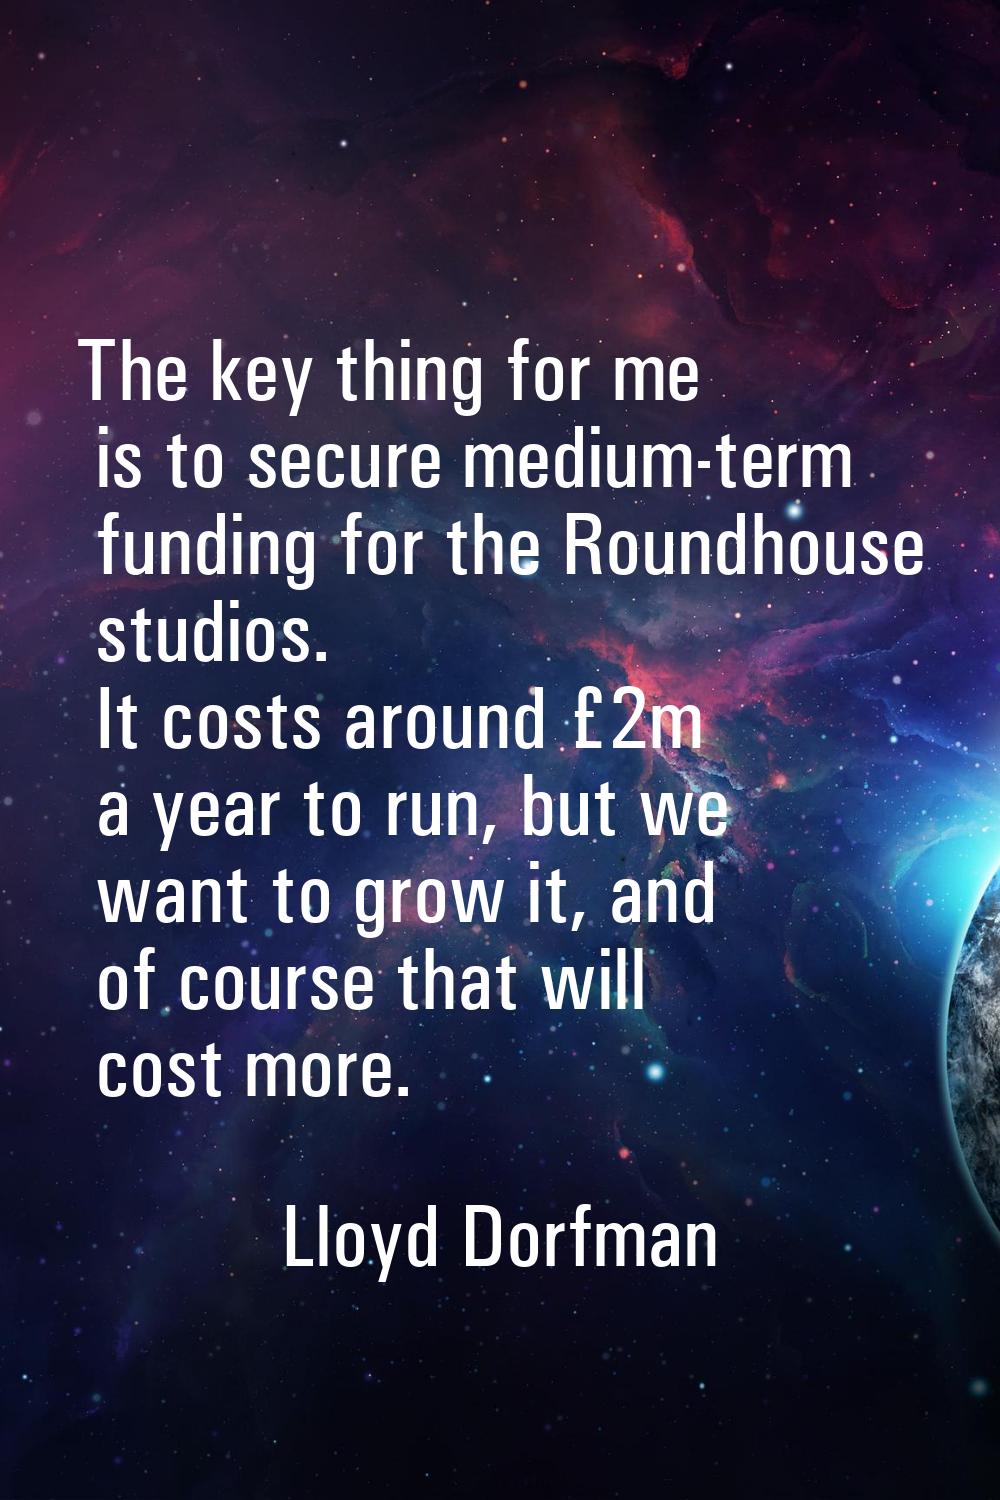 The key thing for me is to secure medium-term funding for the Roundhouse studios. It costs around £